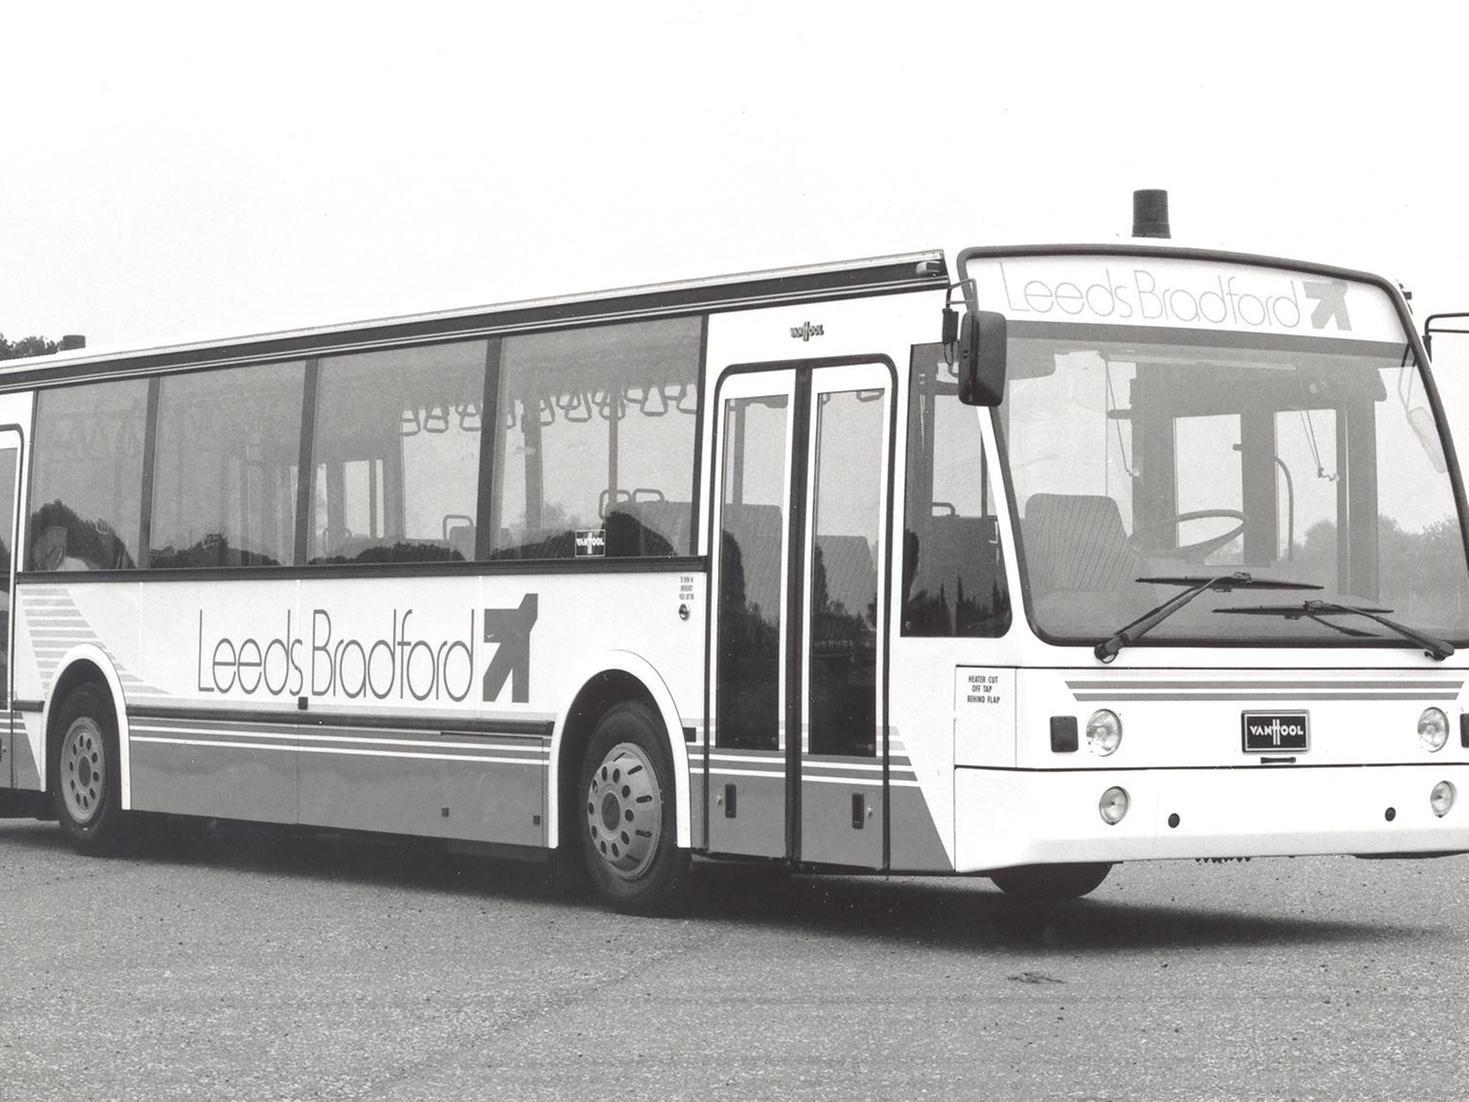 Recognise this? Leeds Bradford Airport was the first in the UK to aquire these passenger transfer coaches.